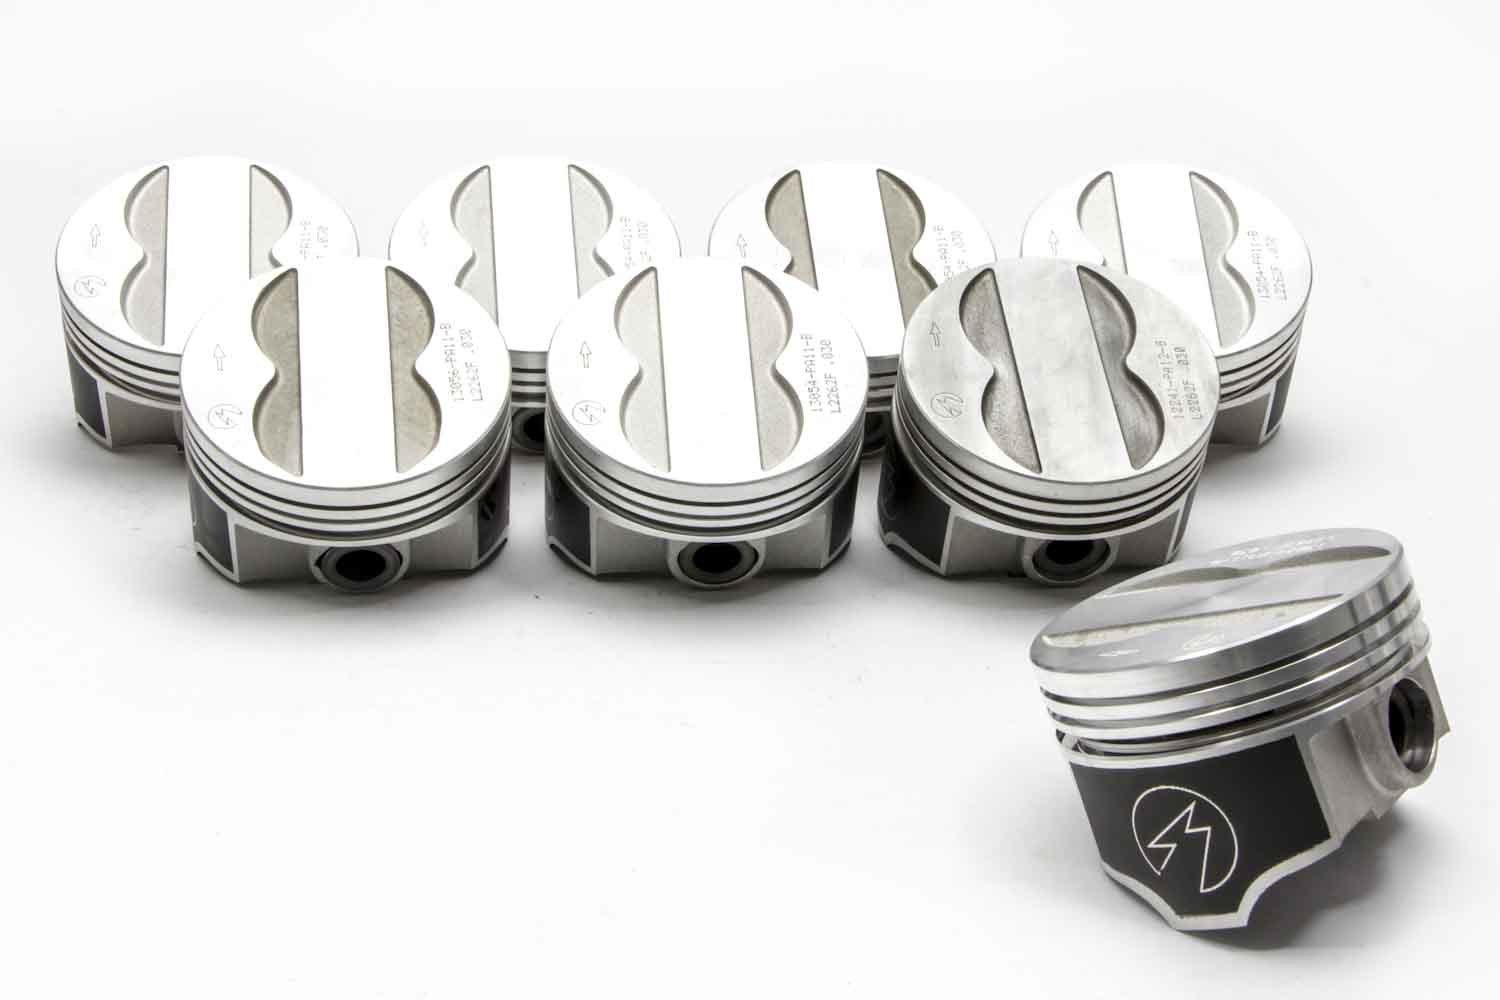 Sealed Power L2262F60 Piston, Speed Pro, Forged, 4.180 in Bore, 5/64 x 5/64 x 3/16 in Ring Grooves, Minus 6.70 cc, Coated Skirt, Pontiac V8, Set of 8